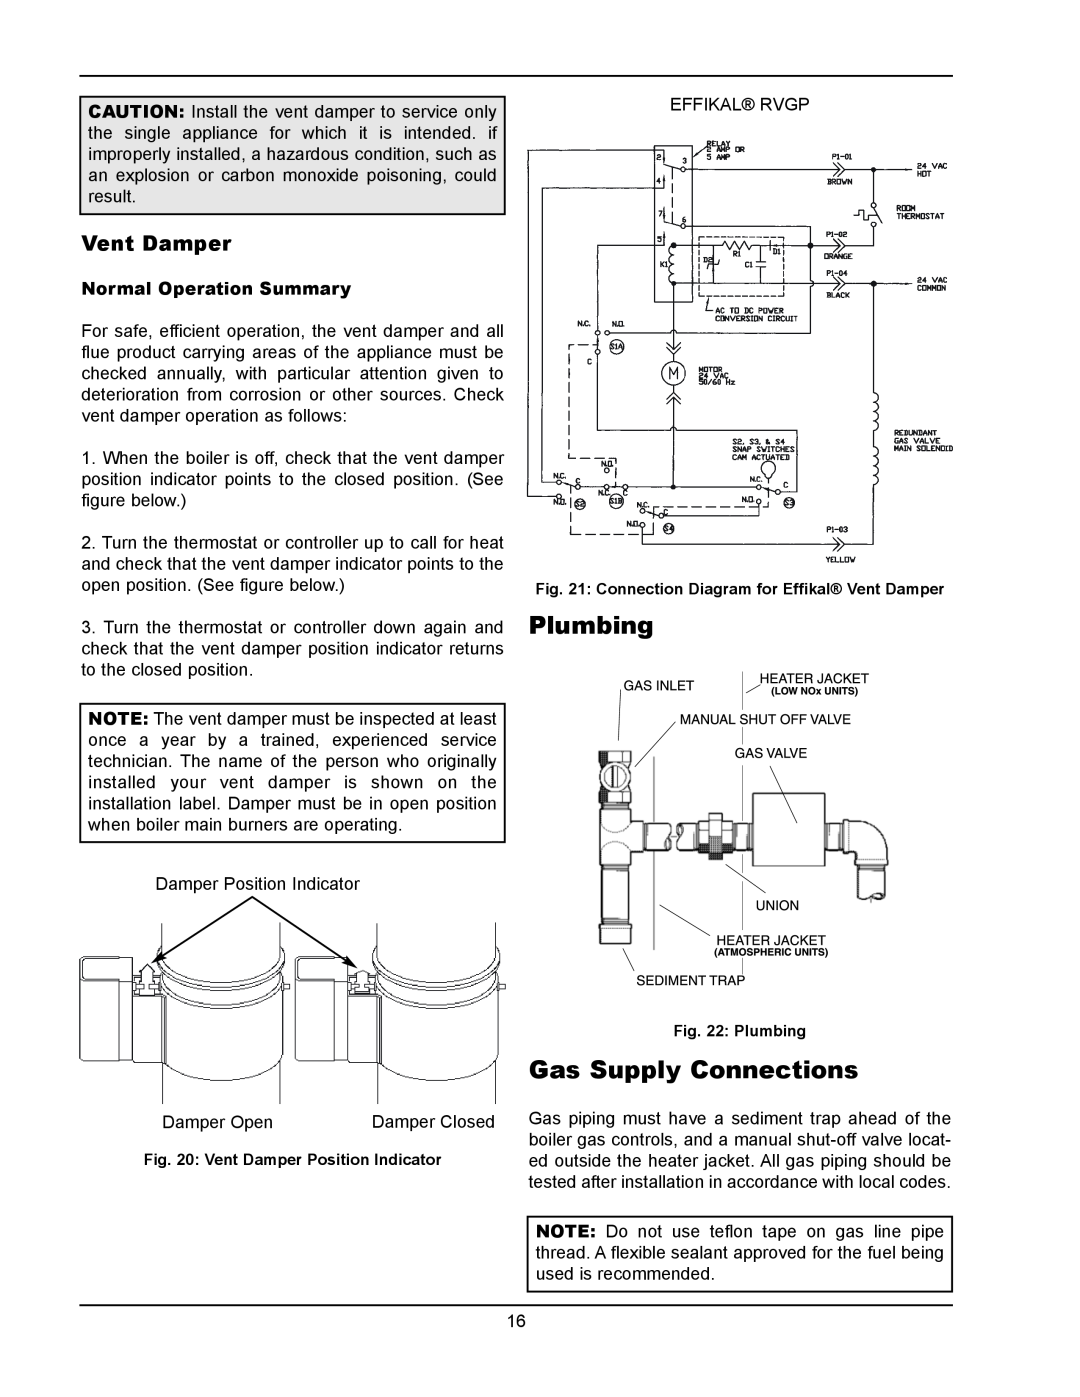 Raypak 133-4001 manual Plumbing, Gas Supply Connections, Vent Damper, Normal Operation Summary 